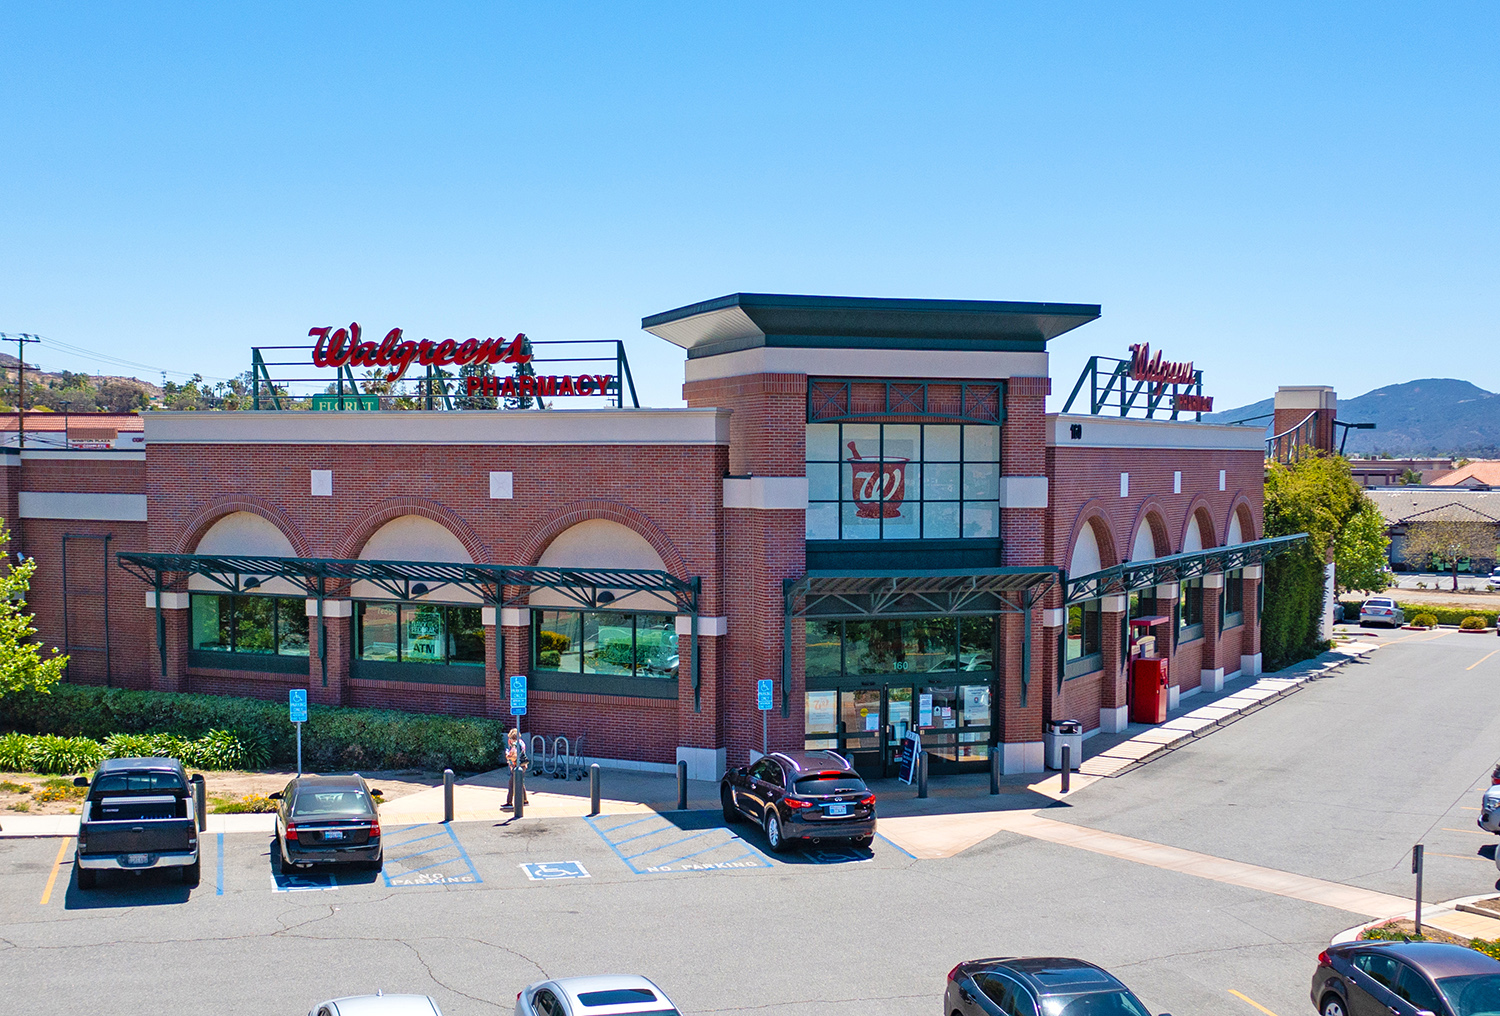 Hanley Investment Group Arranges Sale of Single-Tenant Walgreens in Lake Elsinore, Calif. for $10.5 Million